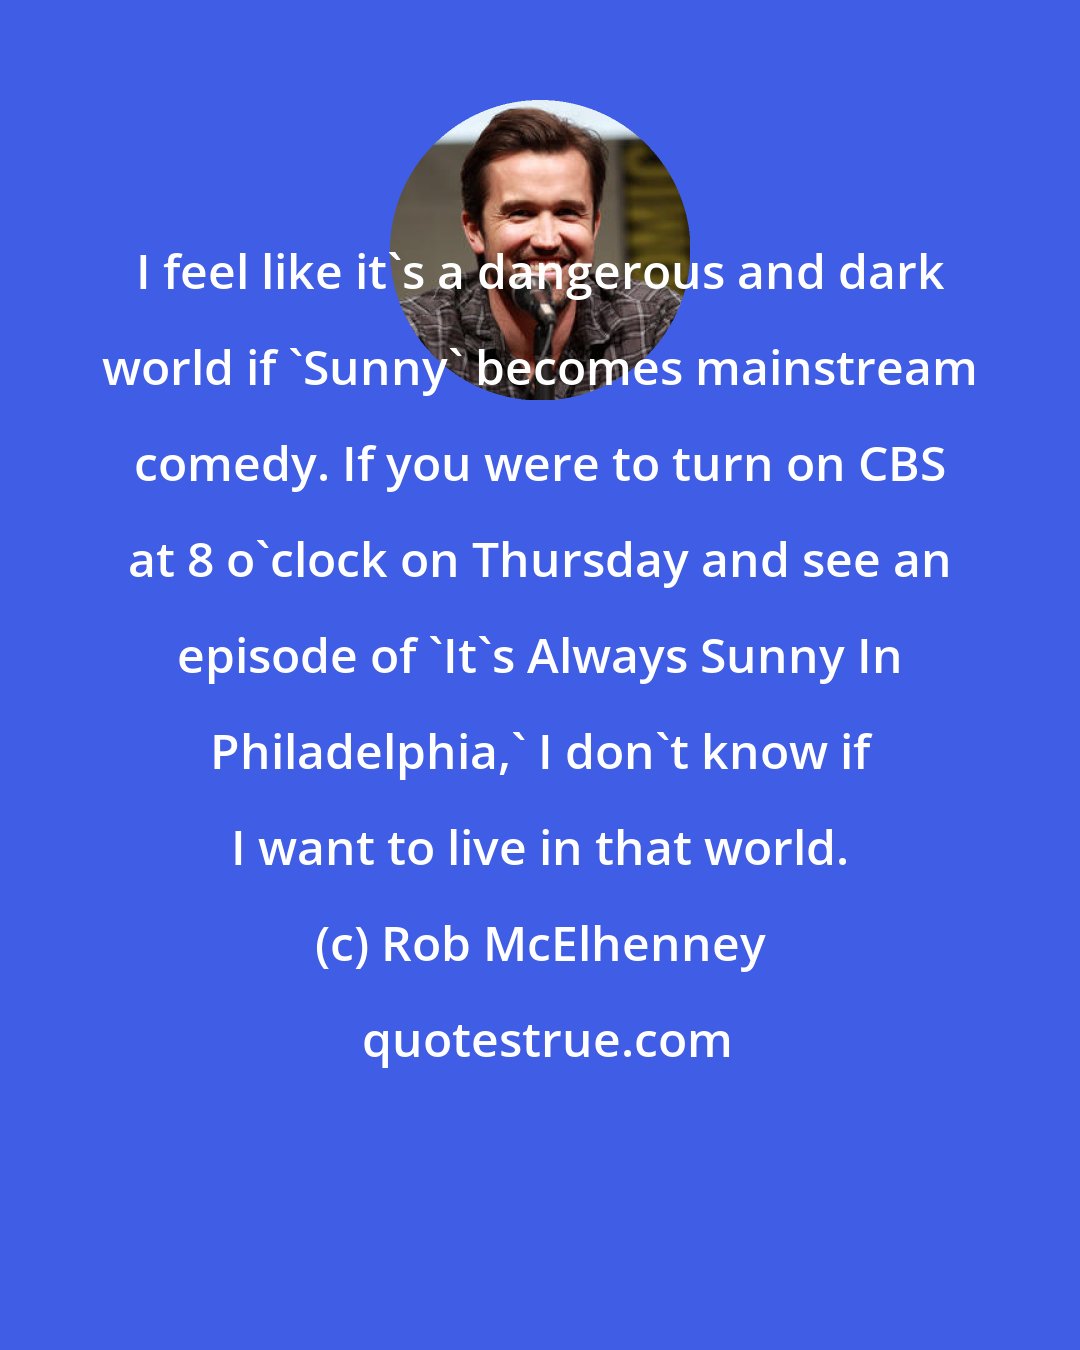 Rob McElhenney: I feel like it's a dangerous and dark world if 'Sunny' becomes mainstream comedy. If you were to turn on CBS at 8 o'clock on Thursday and see an episode of 'It's Always Sunny In Philadelphia,' I don't know if I want to live in that world.